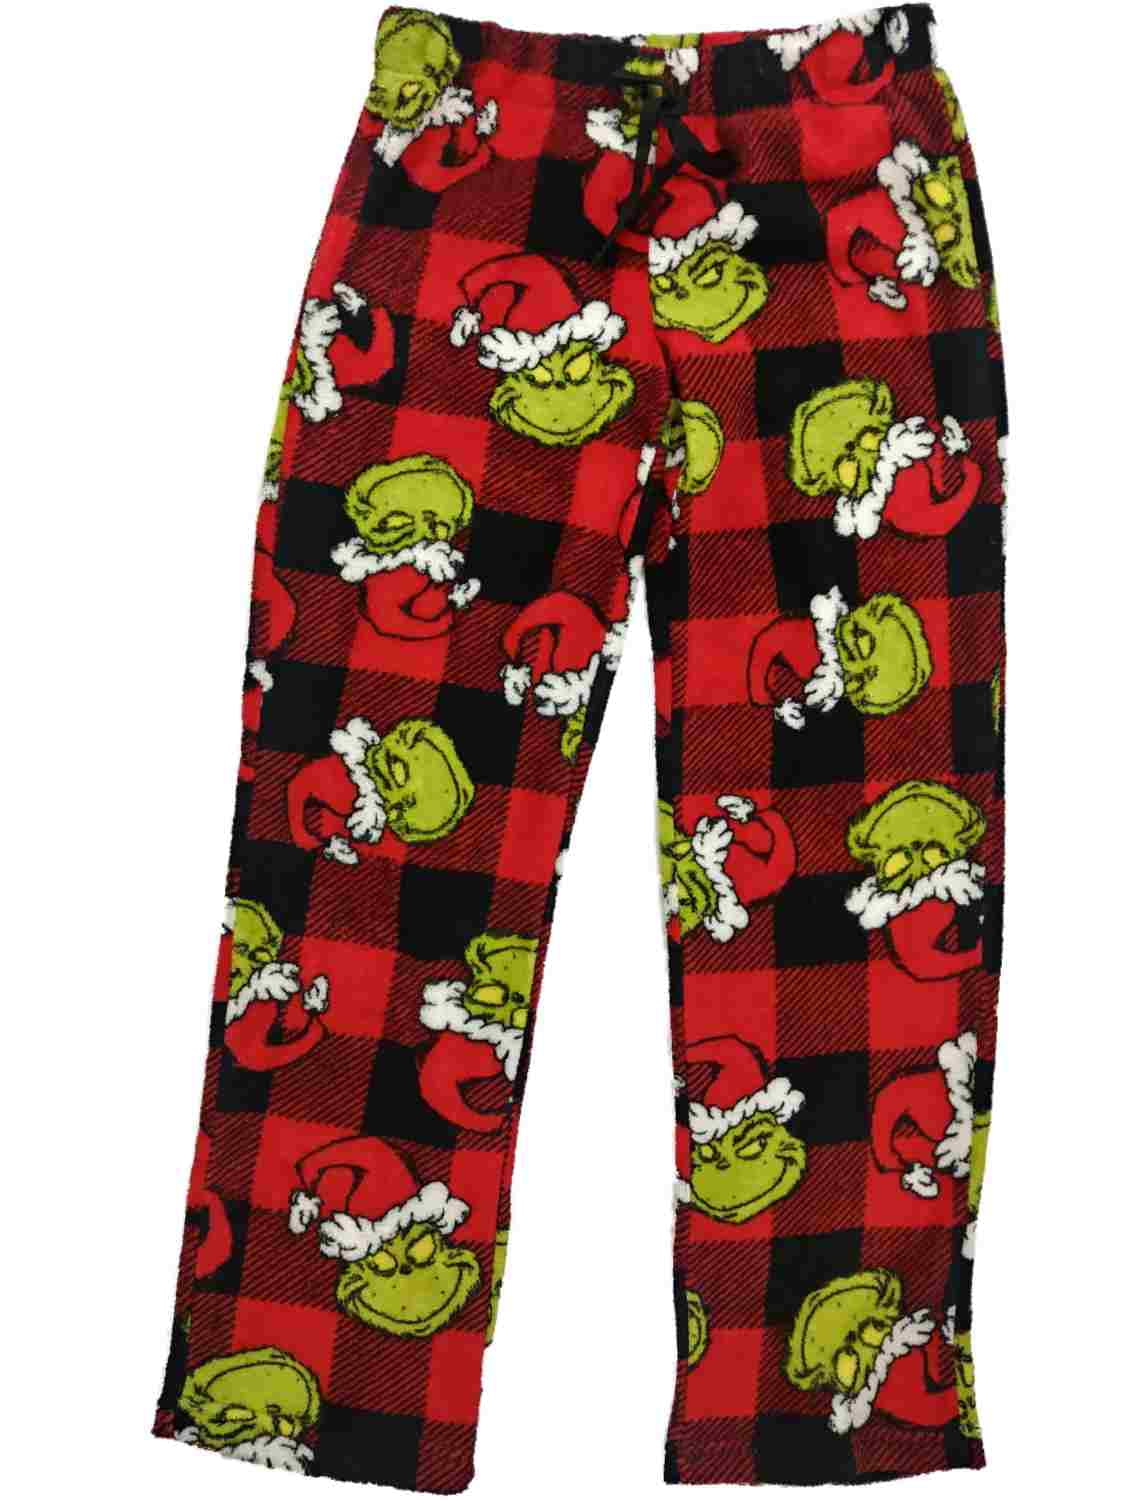 Red and Plaid Grinch Blanket